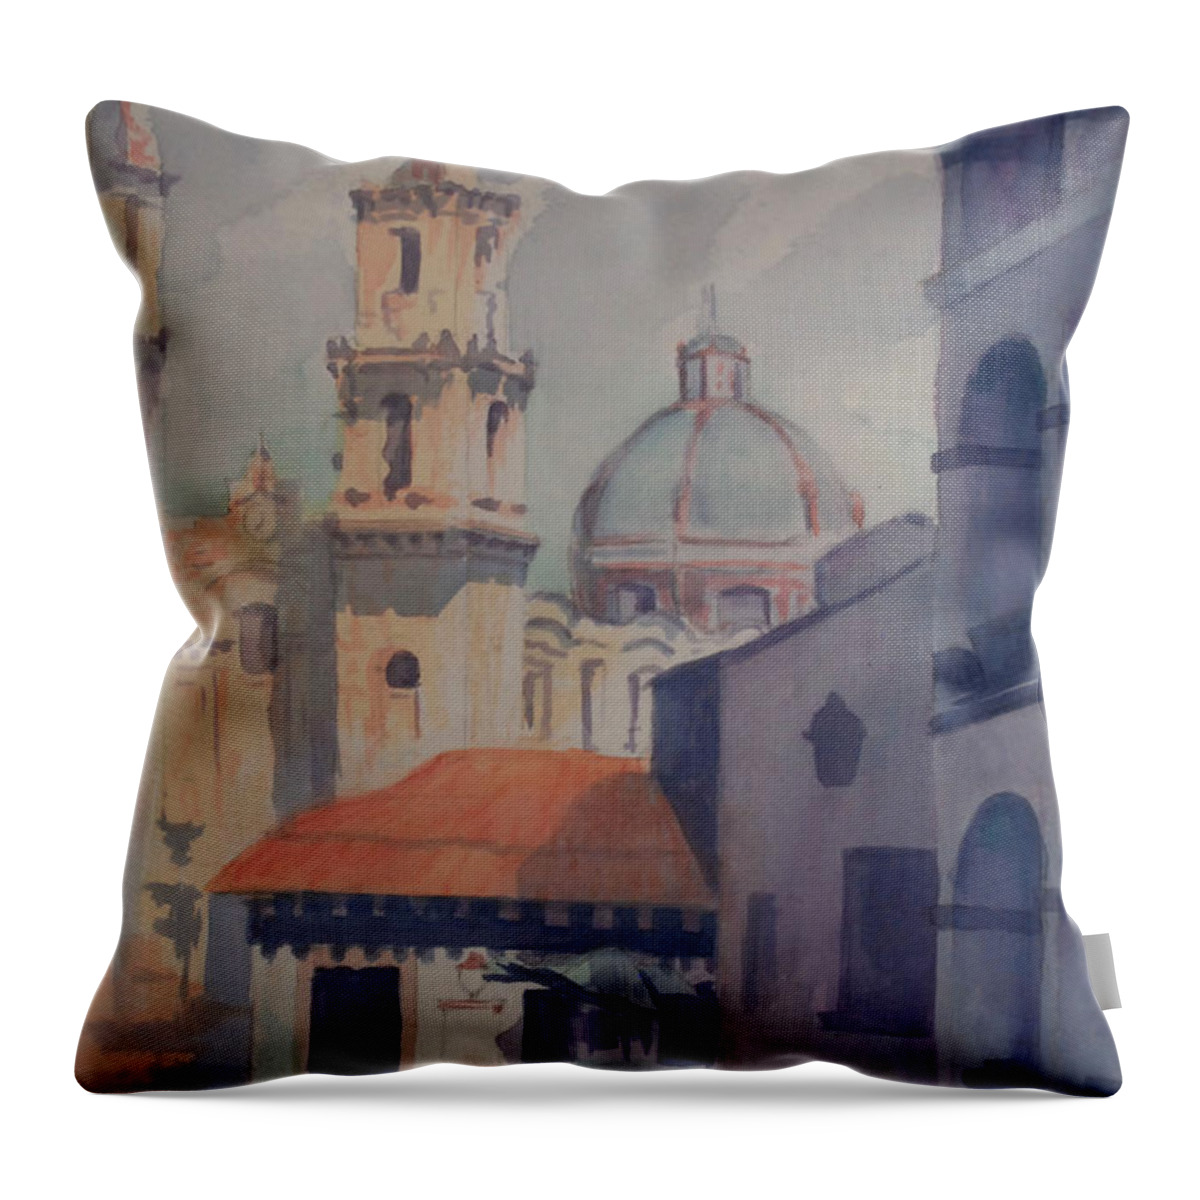 Landscape Throw Pillow featuring the painting Street scene down south by Heidi E Nelson